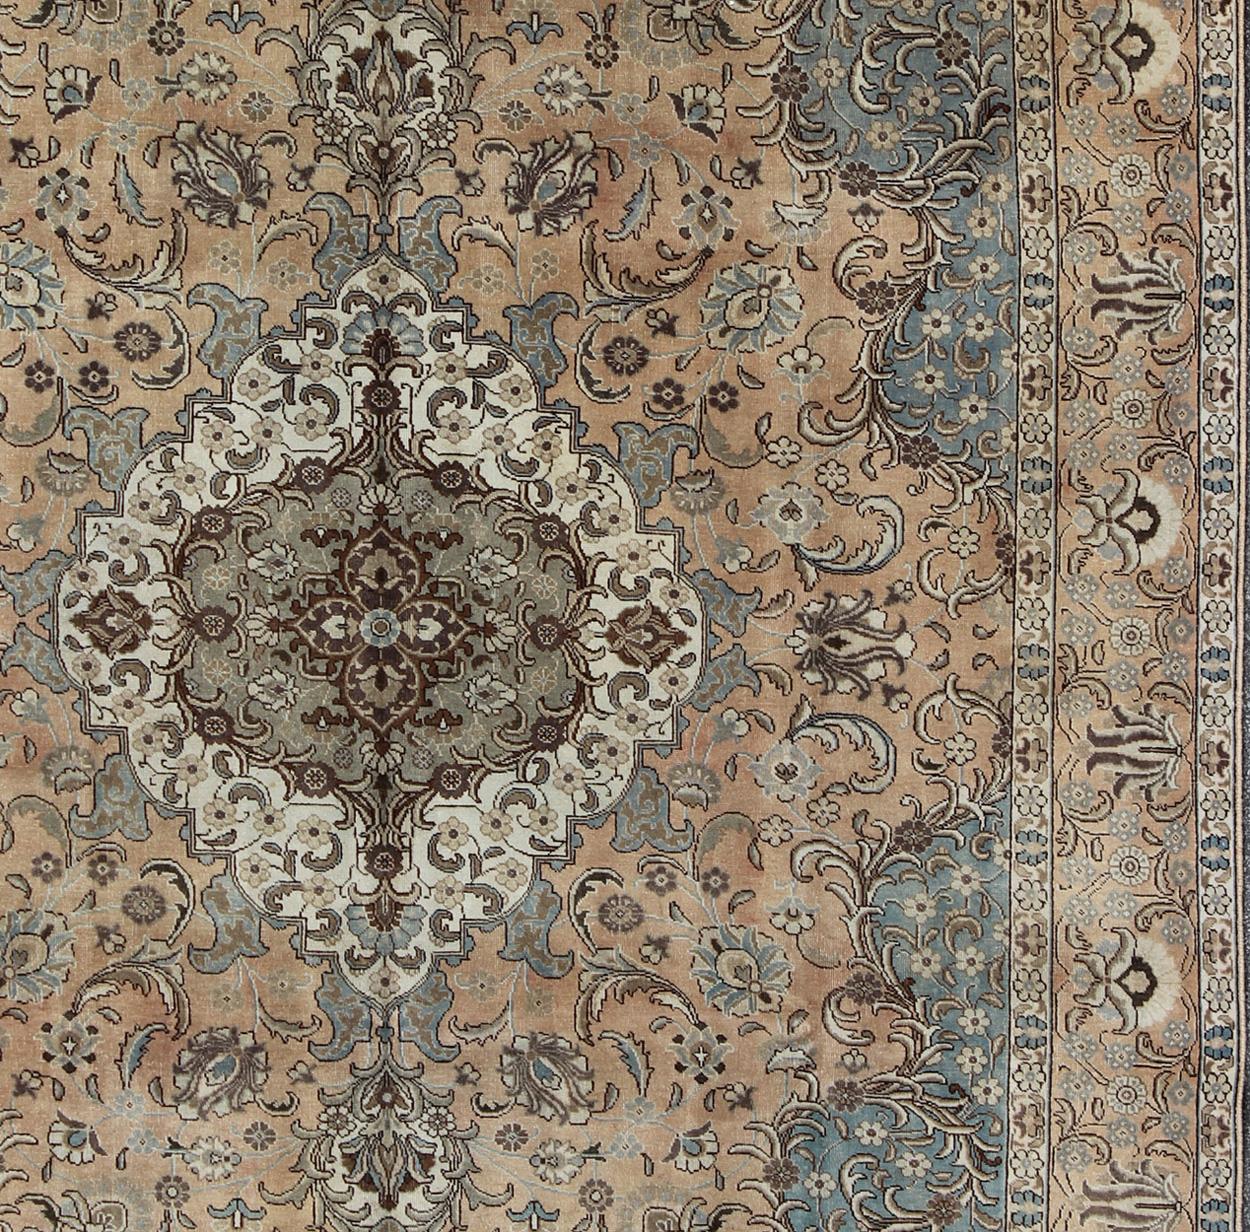 Tabriz Antique rug from Persia with all-over Floral Geometric design in earth tones, rug H-703-04, country of origin / type: Iran / Tabriz, circa 1950

This Persian Tabriz carpet (circa mid-20th century) features a refined palate of mocha, camel,